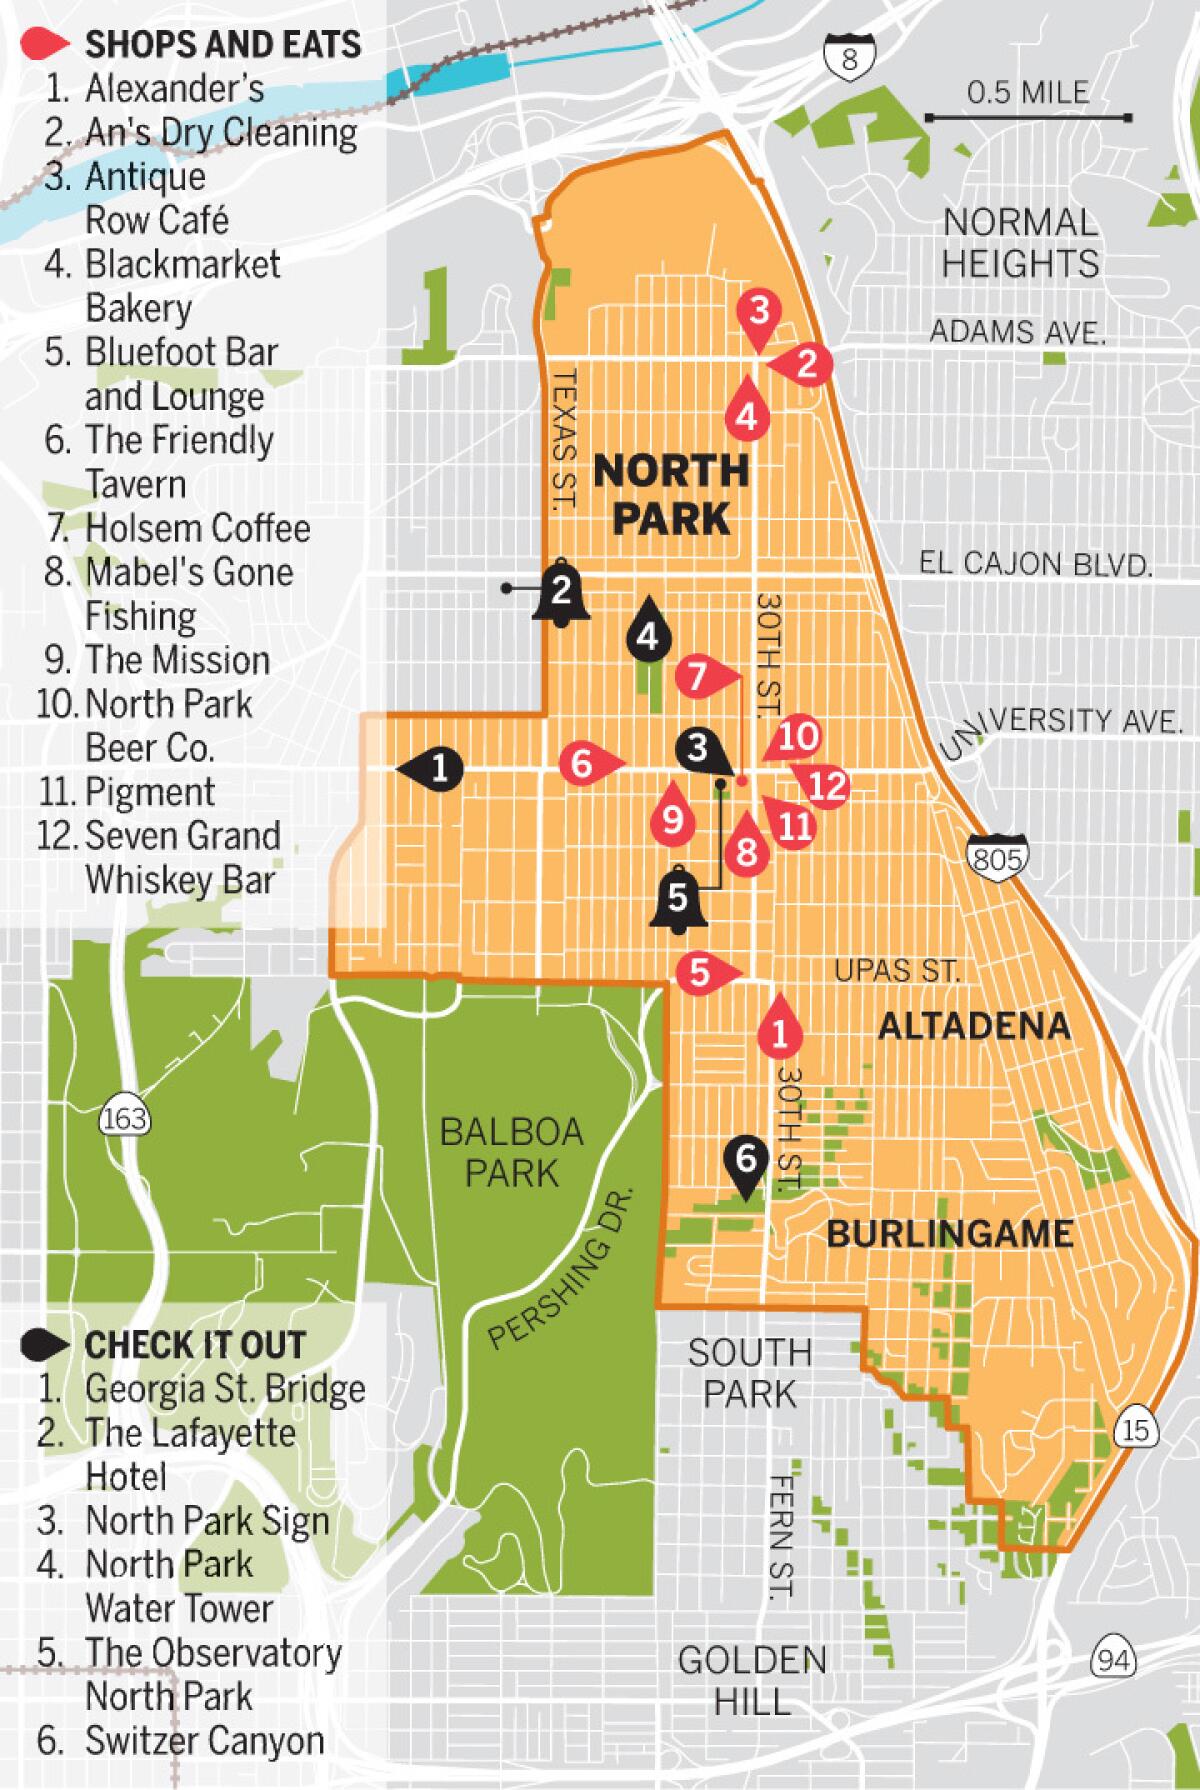 Your guide to North Park: Things to do, restaurants, shopping - The San  Diego Union-Tribune